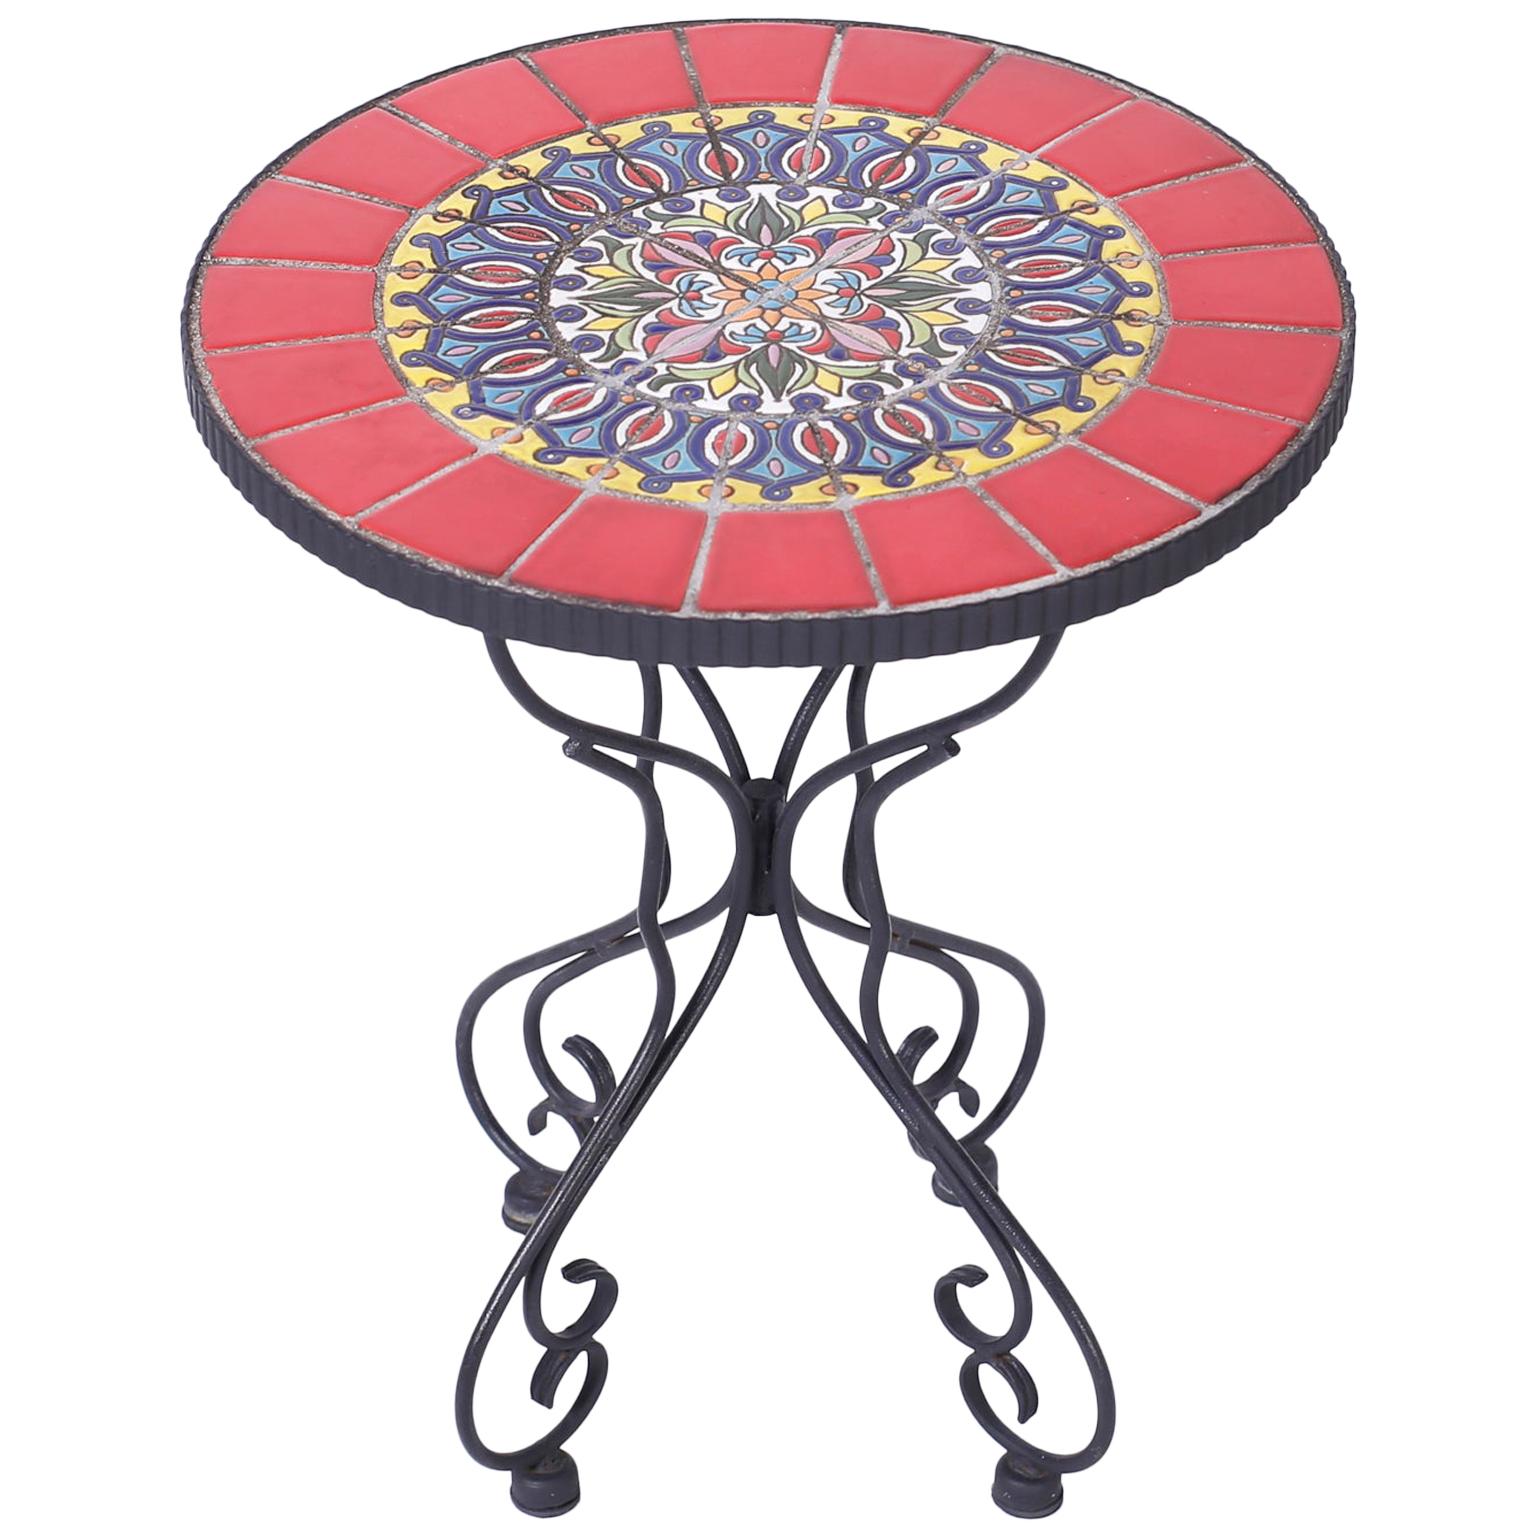 Tile Top and Iron Tabouret or Table